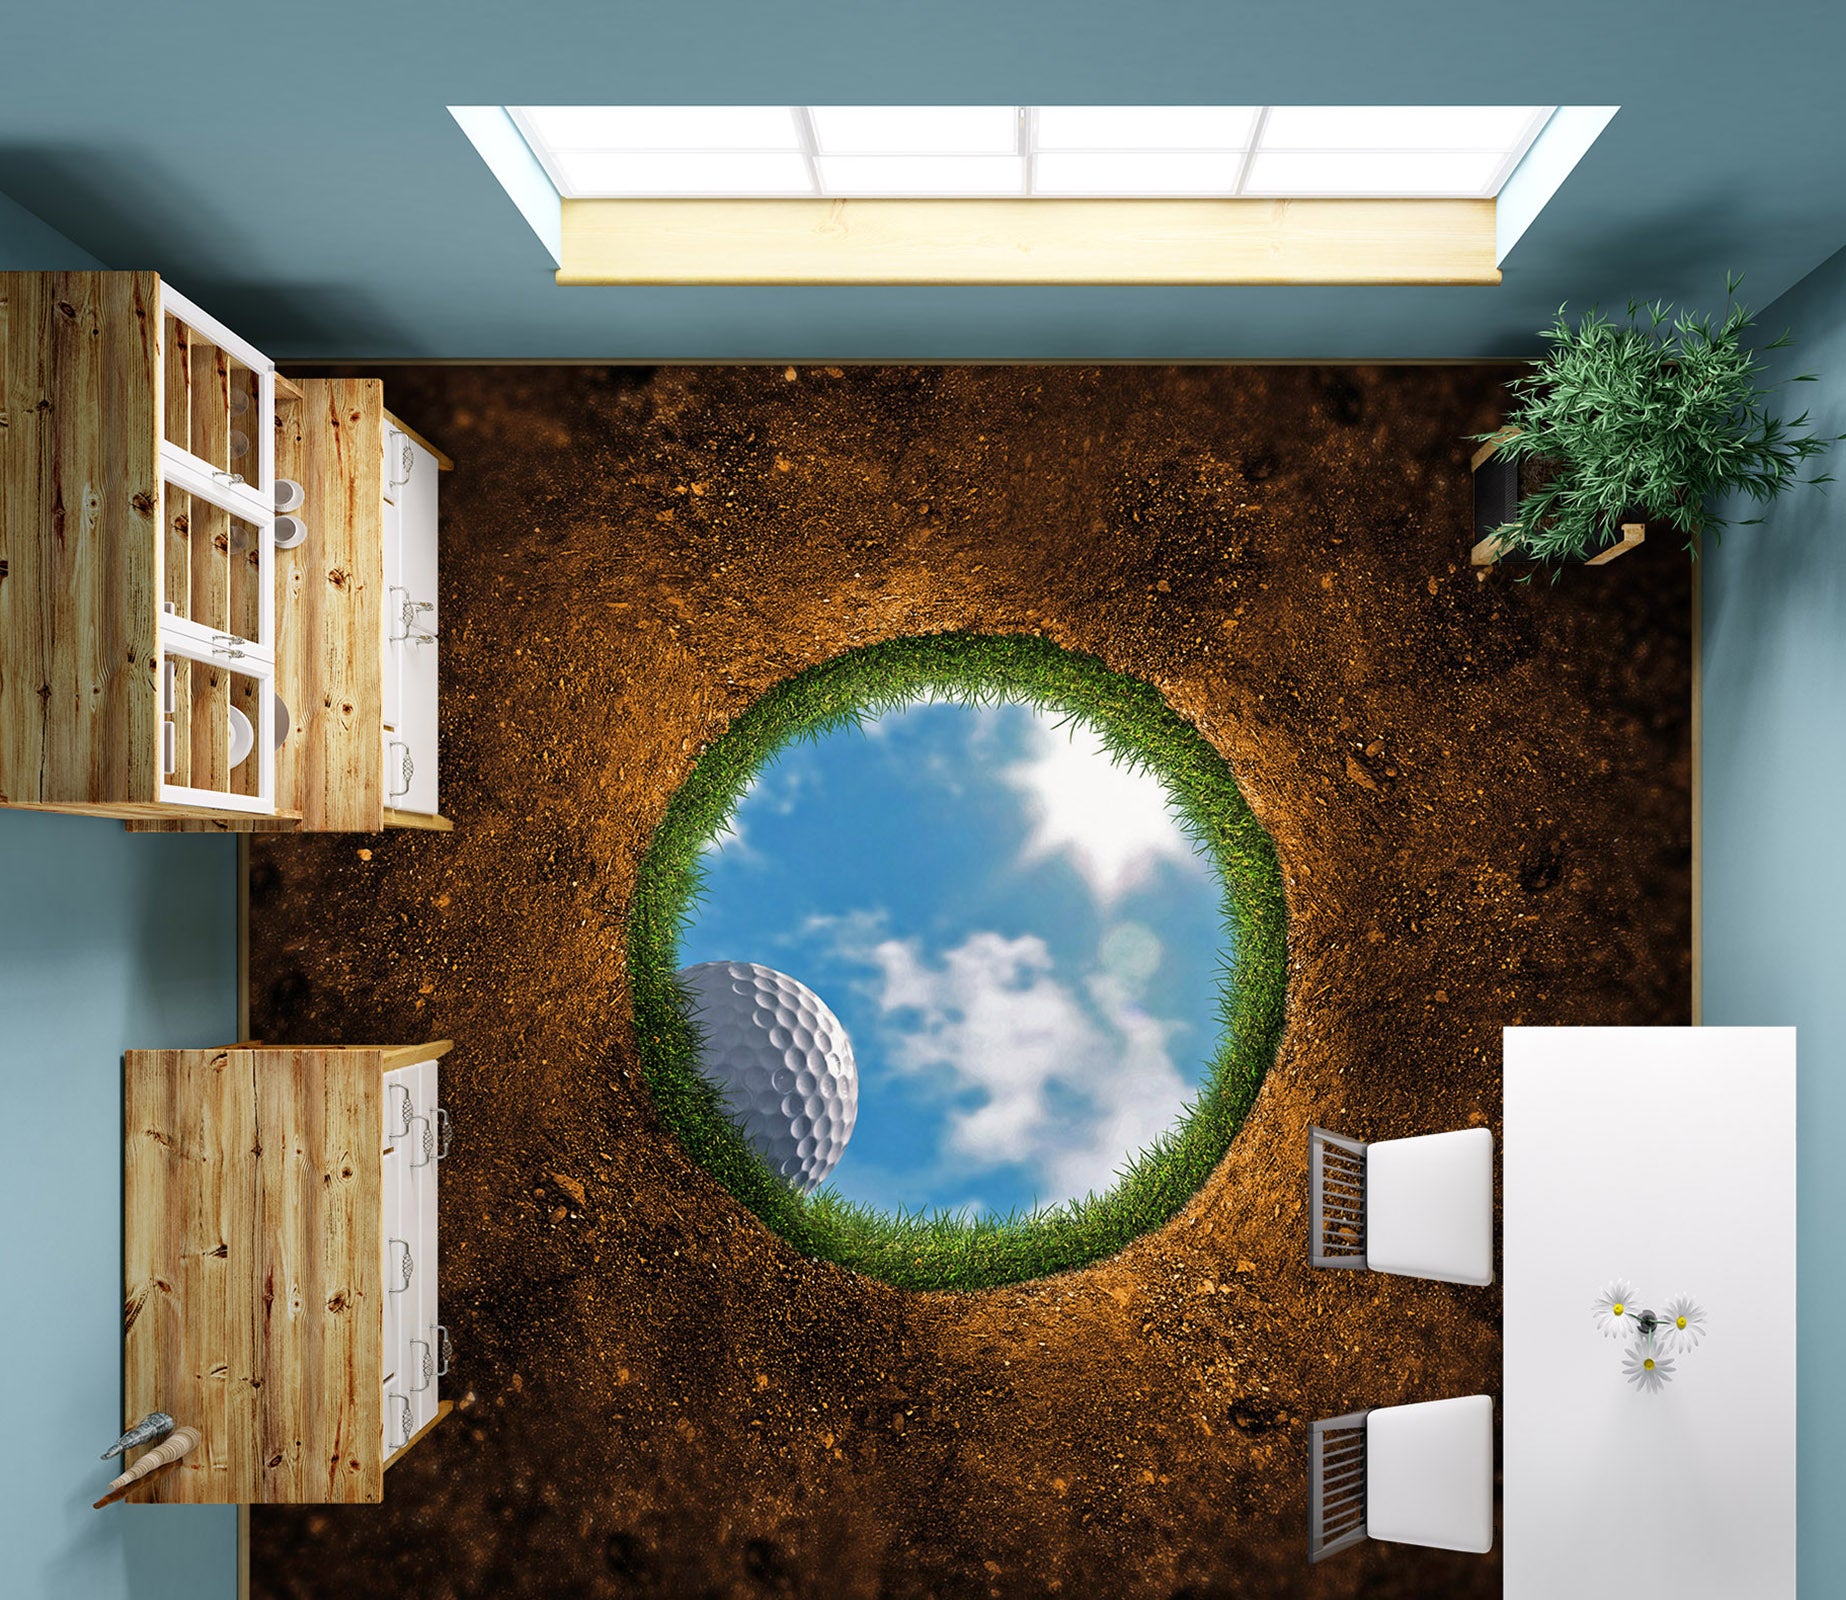 3D Hole And Sky 1469 Floor Mural  Wallpaper Murals Self-Adhesive Removable Print Epoxy